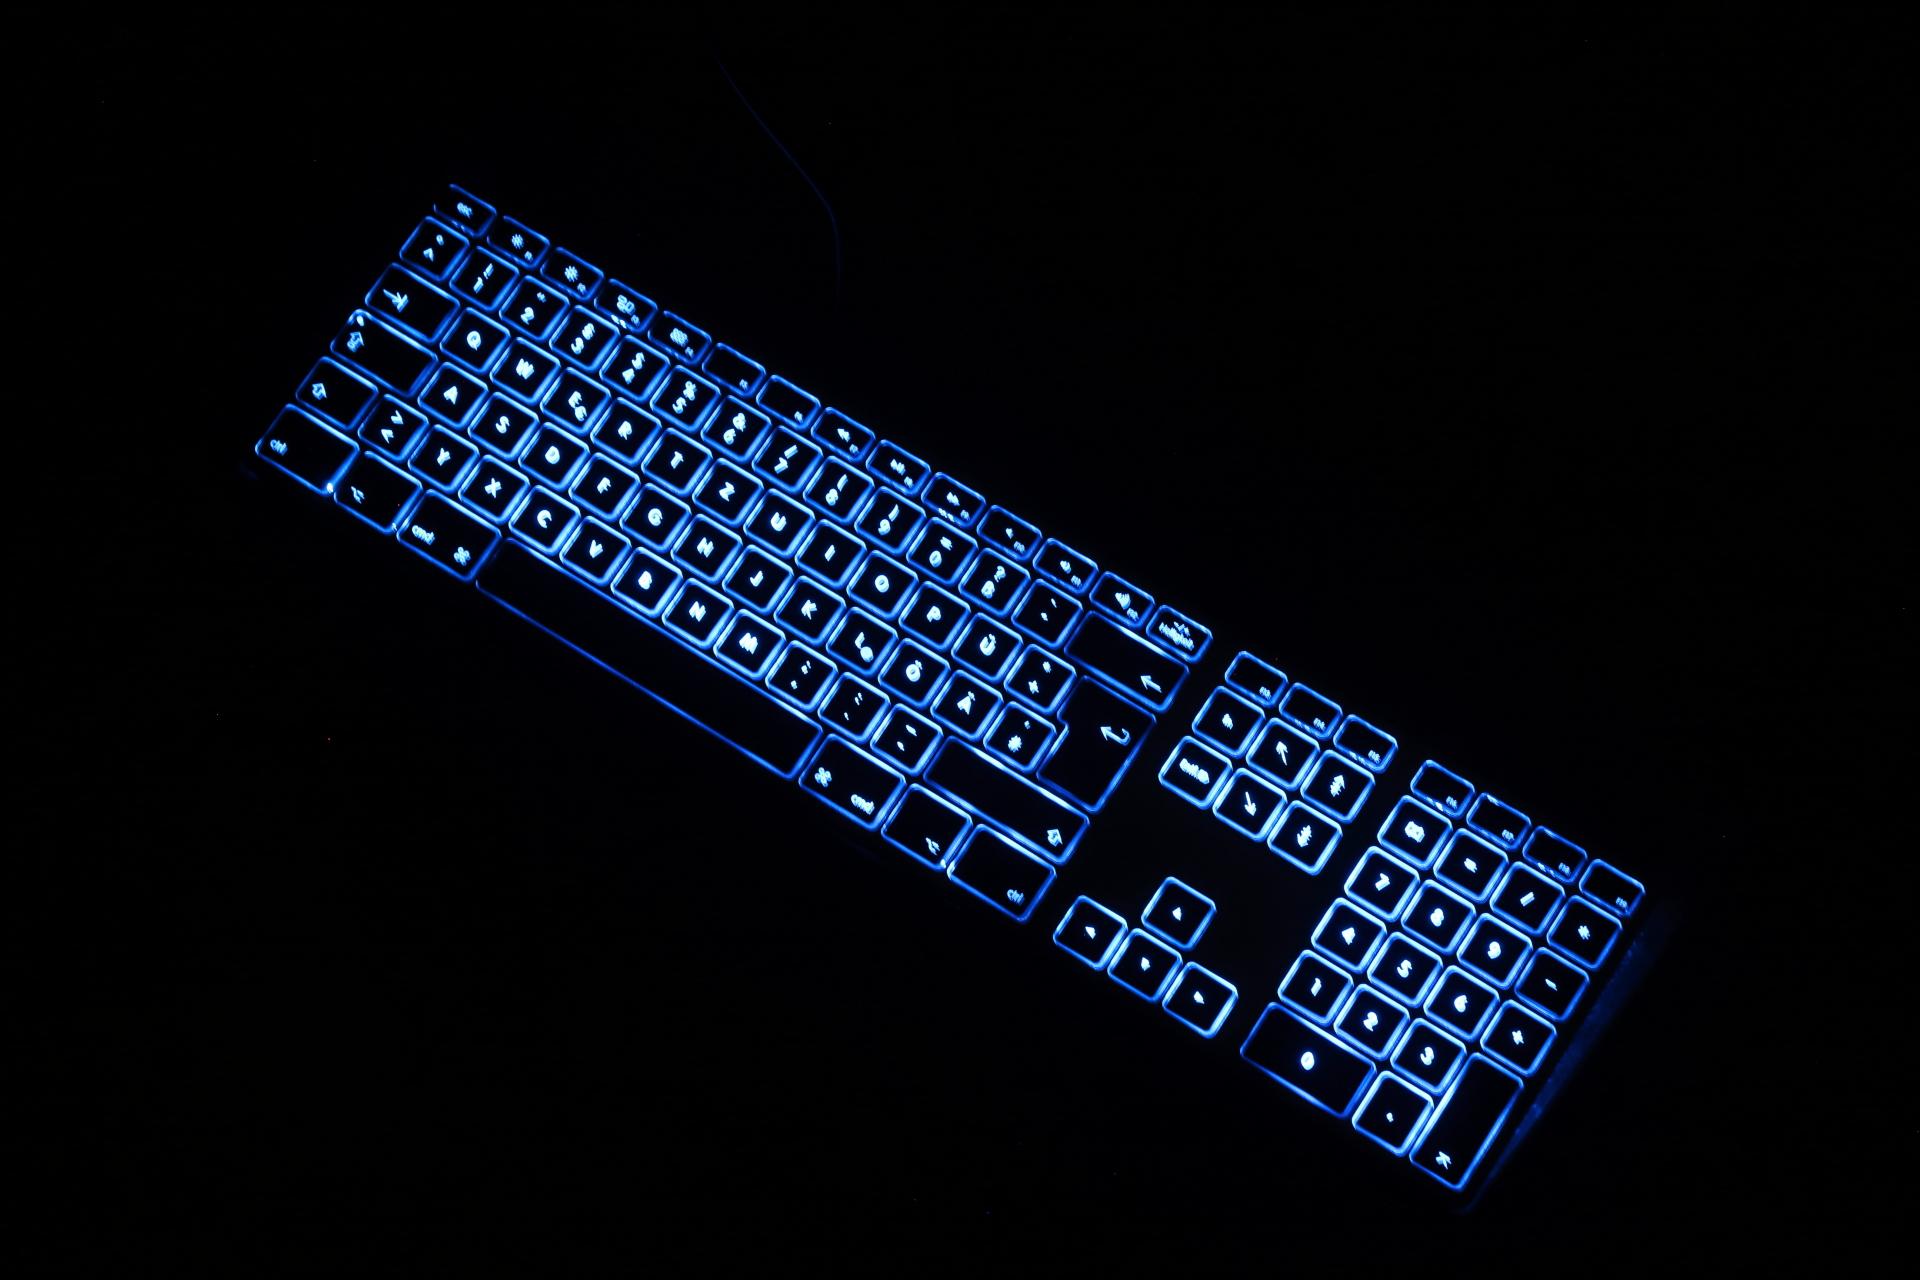 Matias Aluminum Extended USB Keyboard with RGB Backlight Swiss-Layout (Switzerland) for Mac OS - Space-Grey with black keys